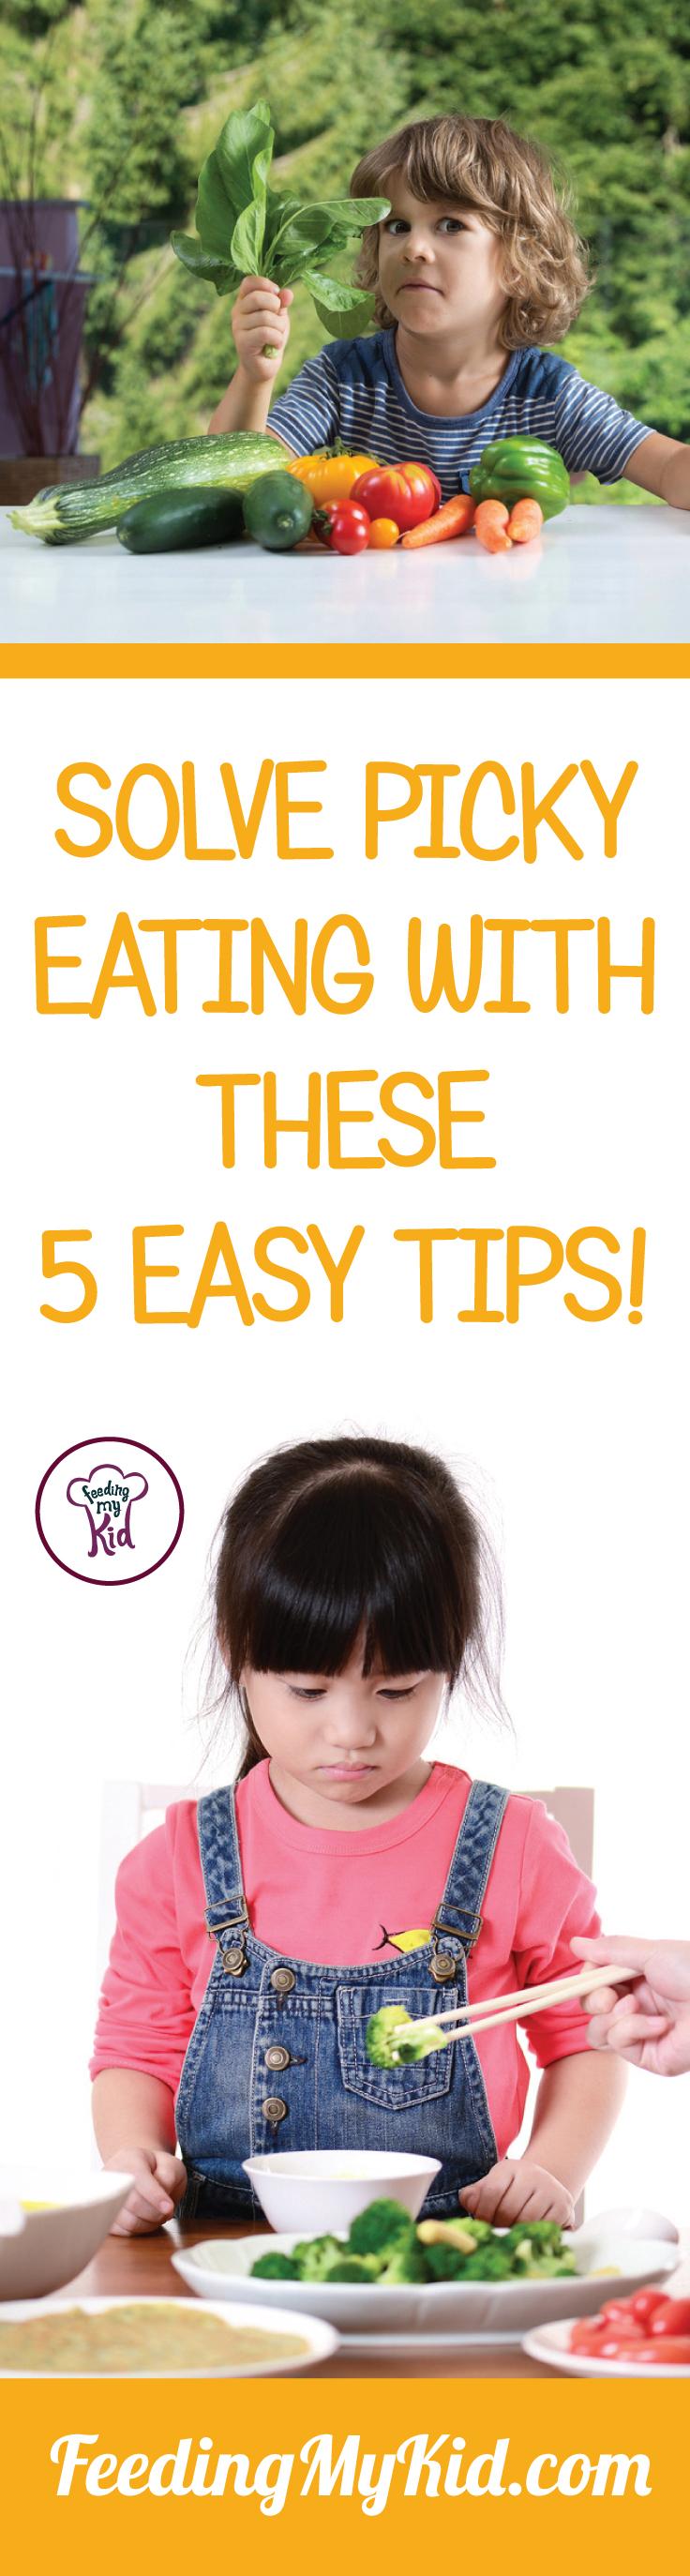 Solve picky eating today! Check out this great video on 5 tips to help your fussy eaters not be so fussy anymore. Feeding My Kid is a filled with all the information you need about how to raise your kids, from healthy tips to nutritious recipes. #FeedingMyKid #pickyeating #tips #kidshealth